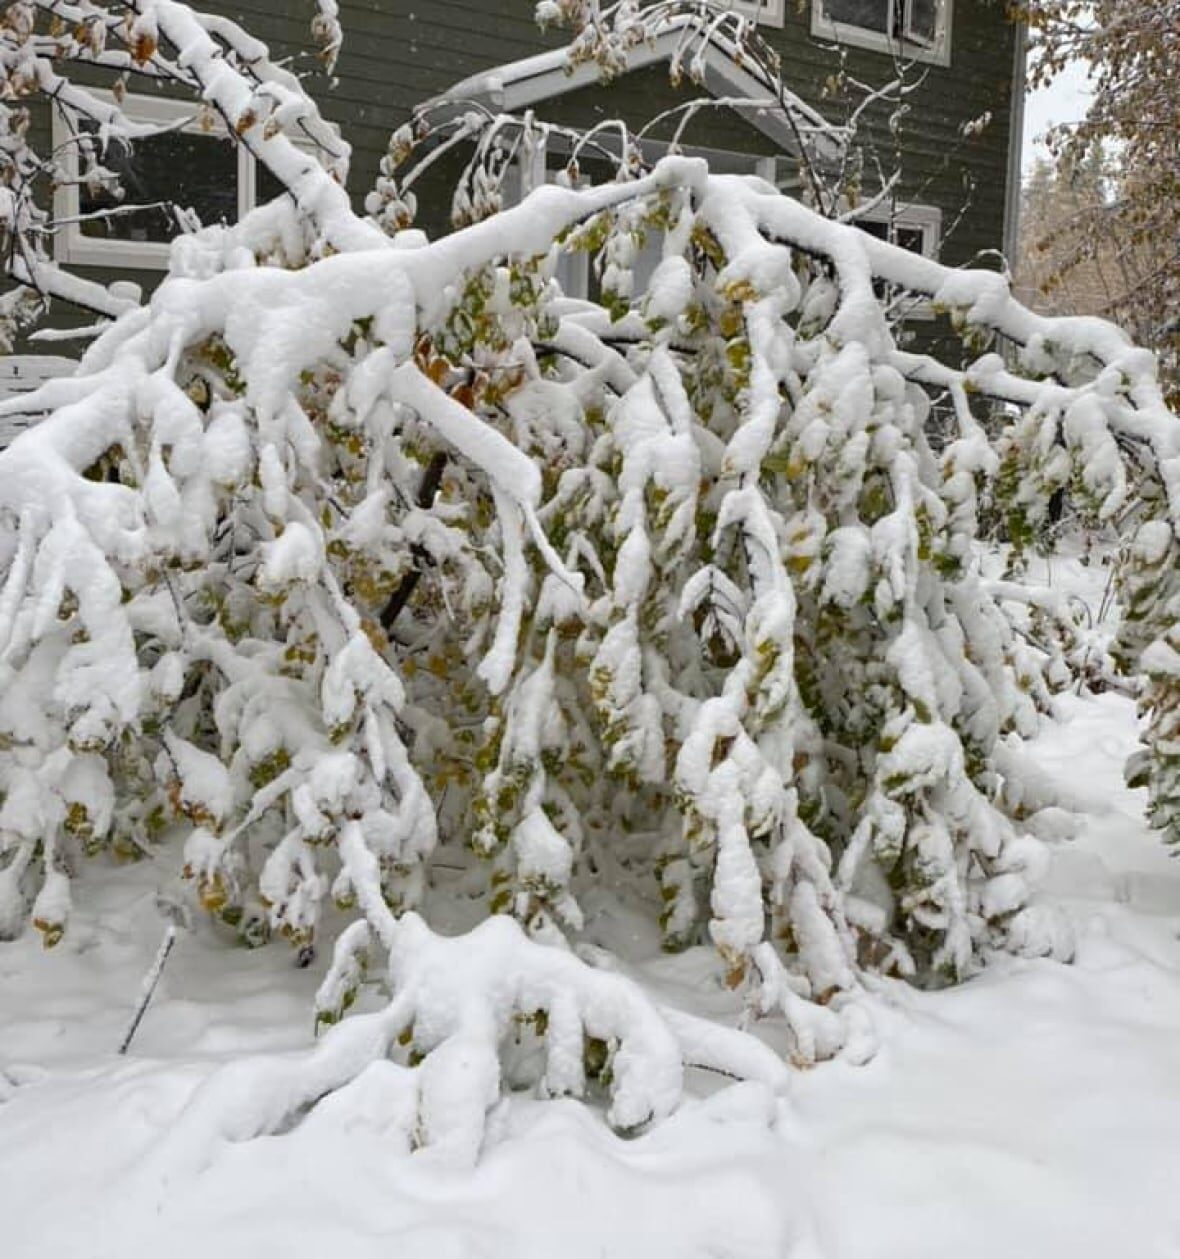 Mayo resident Millie Olsen's maytree is weighed down by wet, heavy snow.